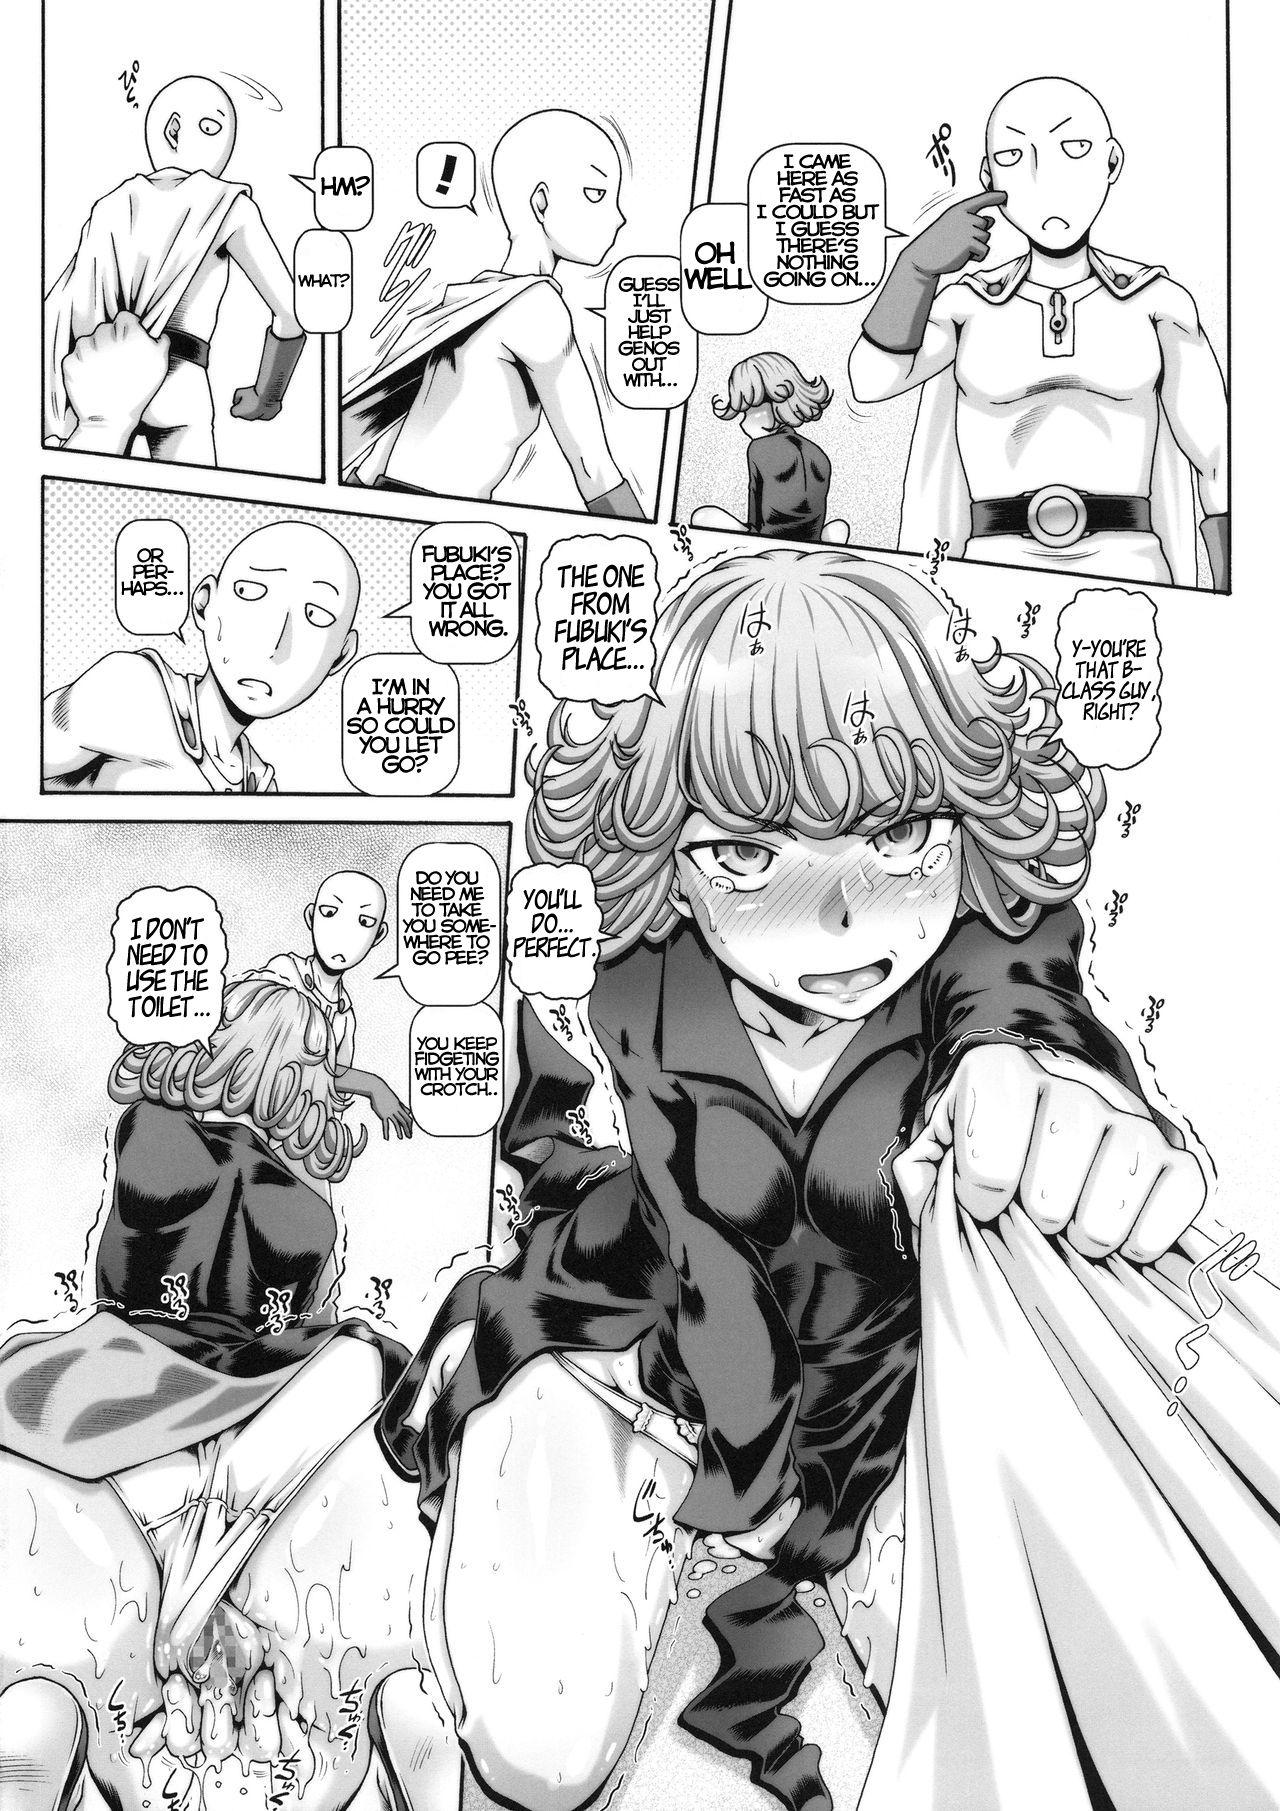 Jerkoff EMPIRE HARD CORE 2019 SUMMER - One punch man Highheels - Page 5